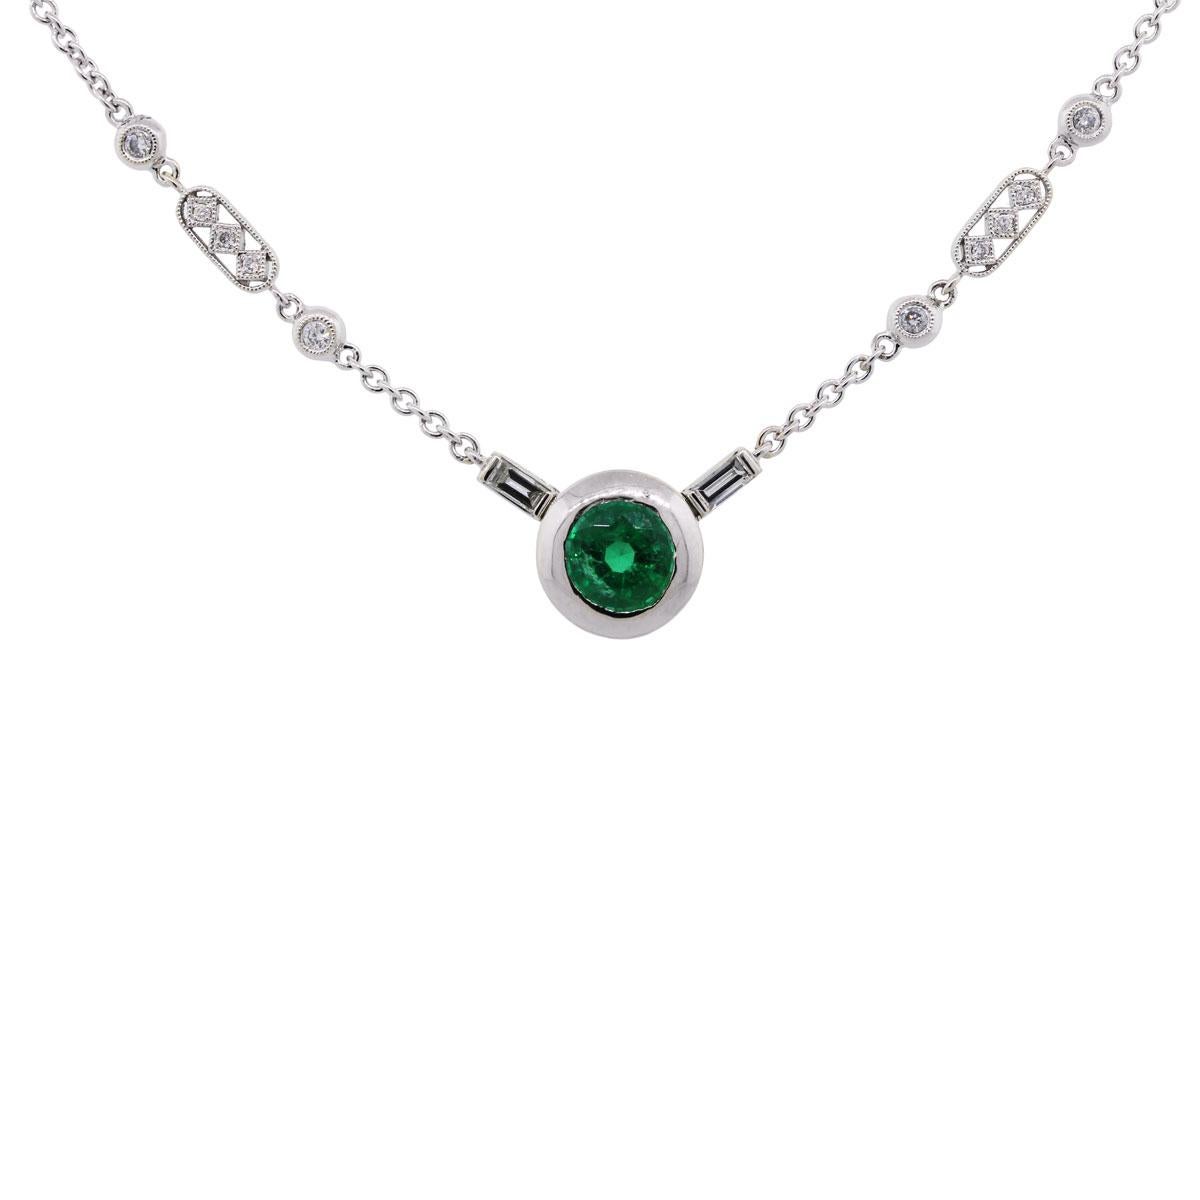 Material: 18k white gold
Gemstone Details: Round shape emerald approximately 1.75ct.
Diamond Details: Approximately 0.35ctw of round brilliant and baguette shape diamonds. Diamonds are H/I in color, SI in clarity
Necklace Measurements: